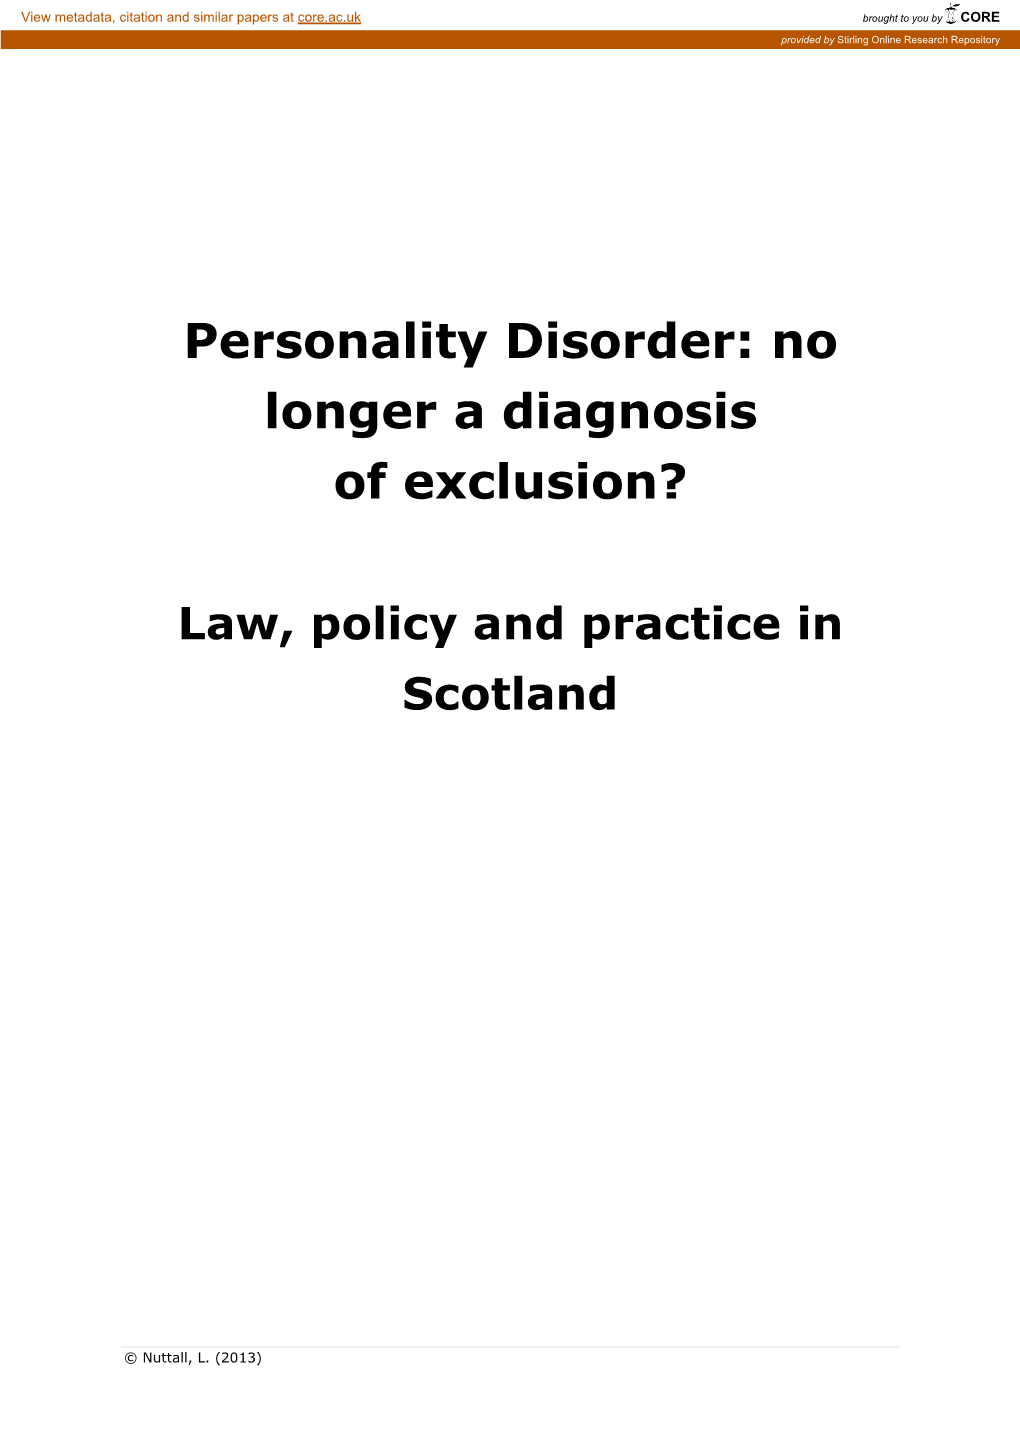 Personality Disorder: No Longer a Diagnosis of Exclusion?